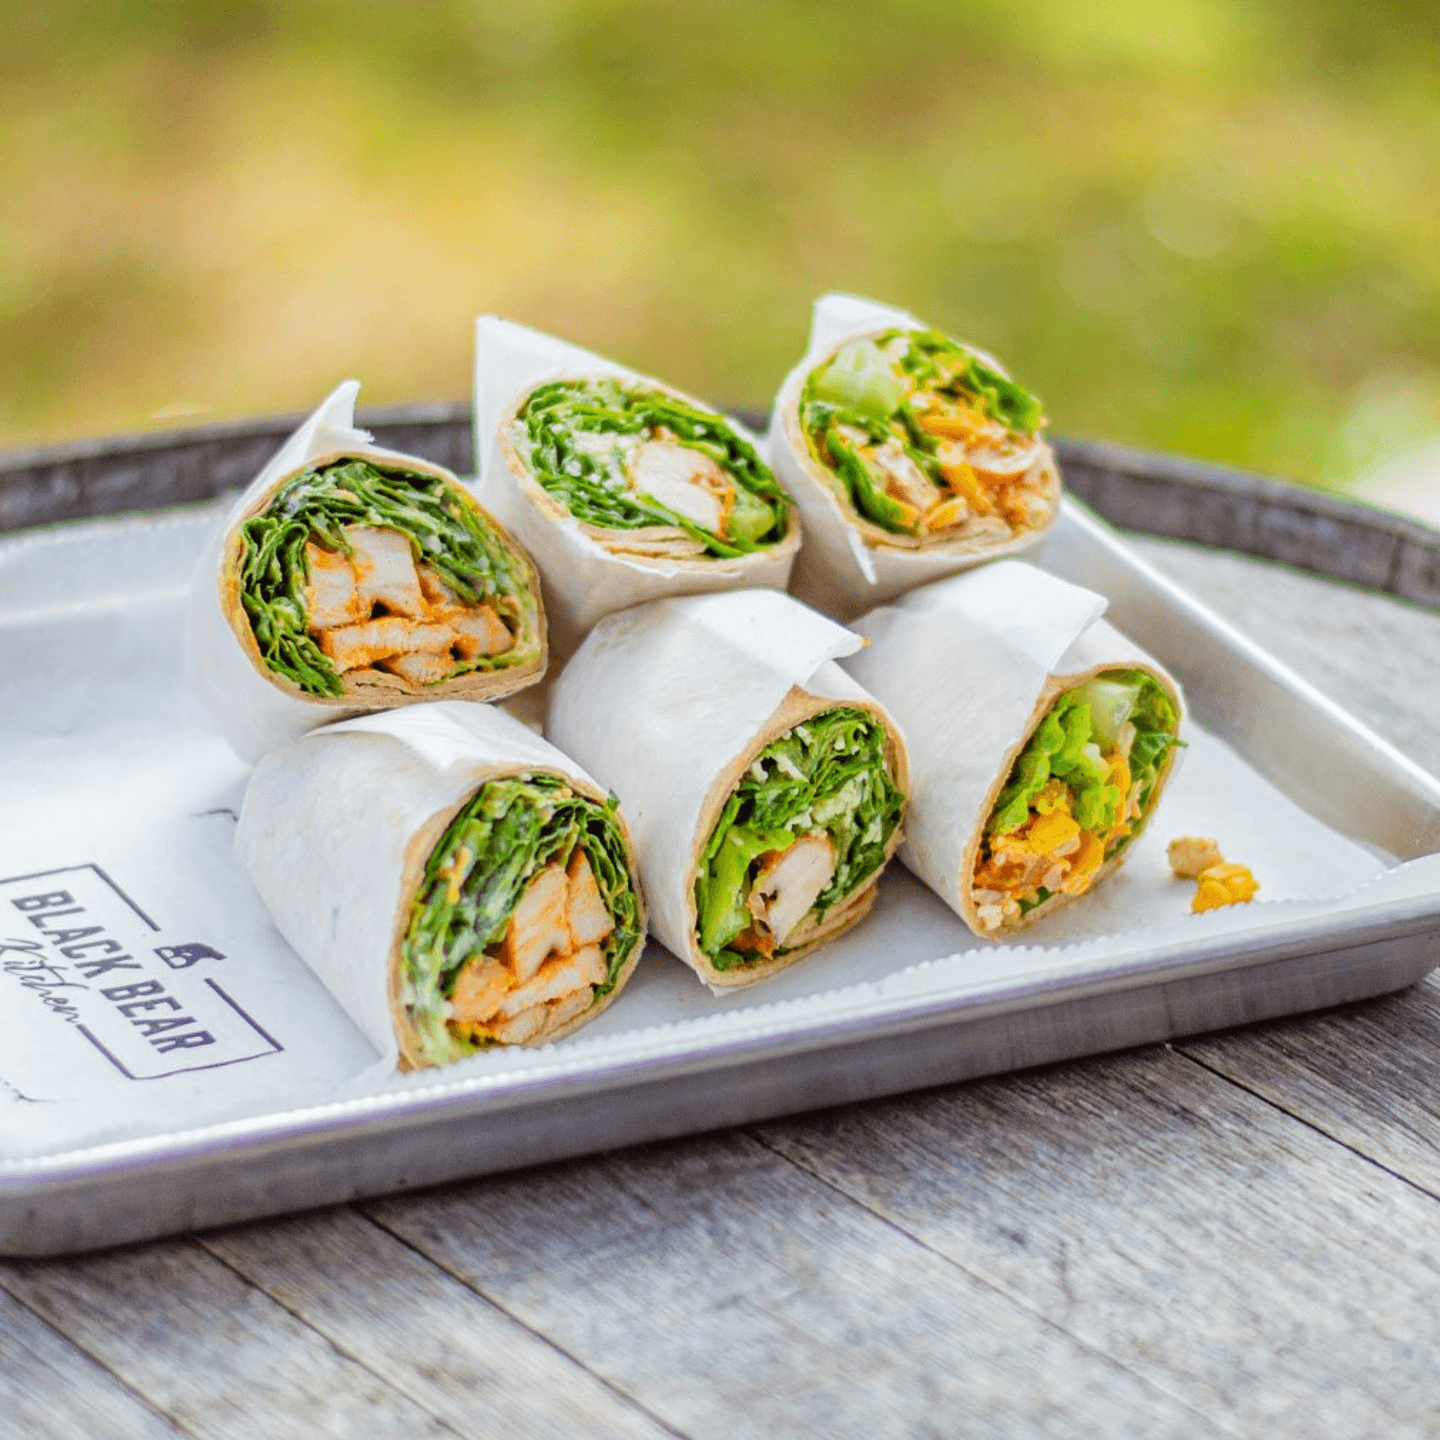 Wrap, Revel, and Roll